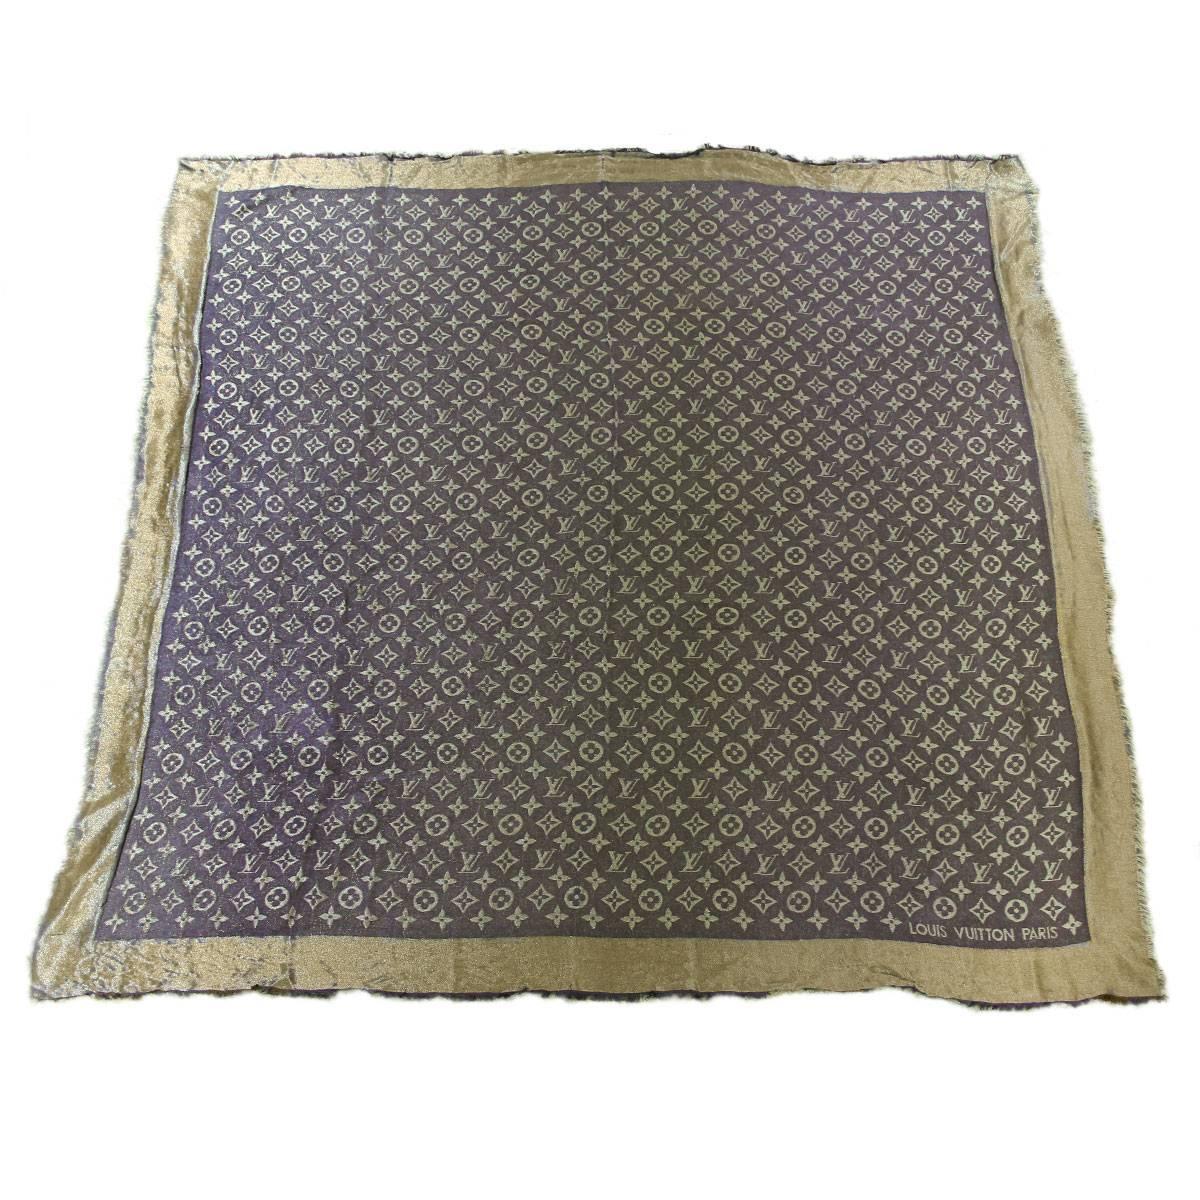 Company: Louis Vuitton
Style: Shawl/Scarf
Dimensions: 53